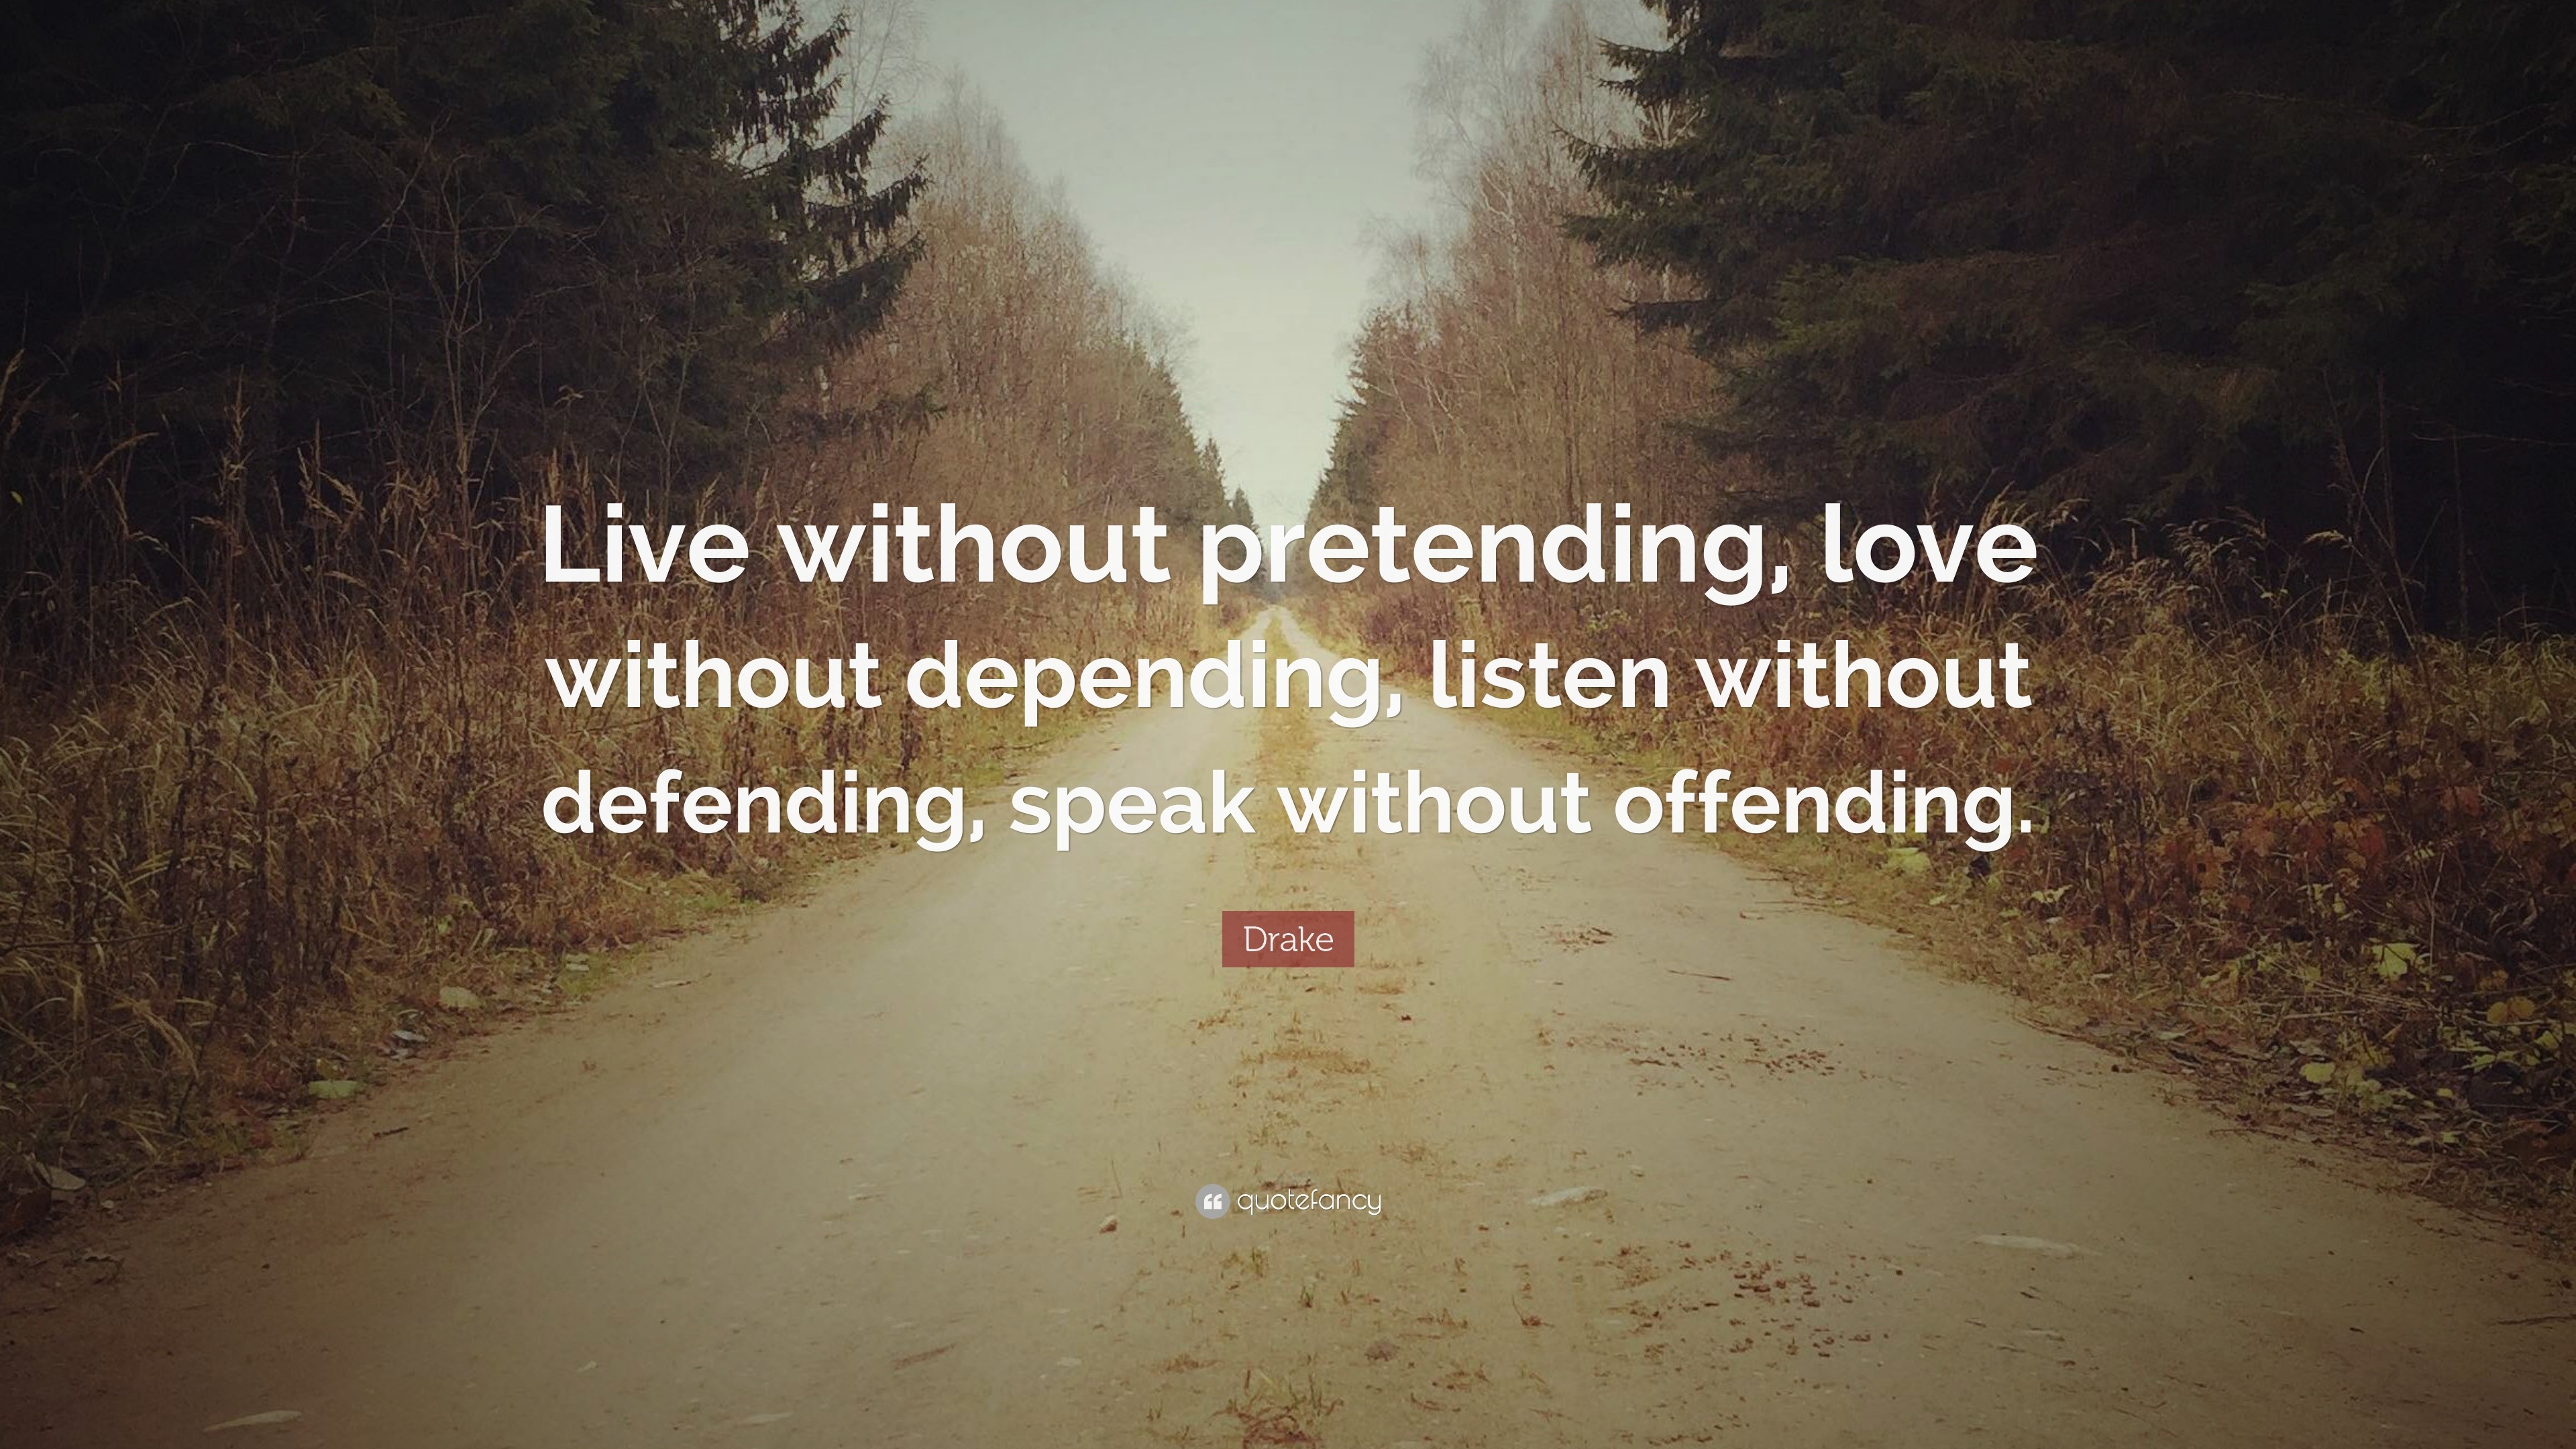 Drake Quote: “Live without pretending, love without depending, listen